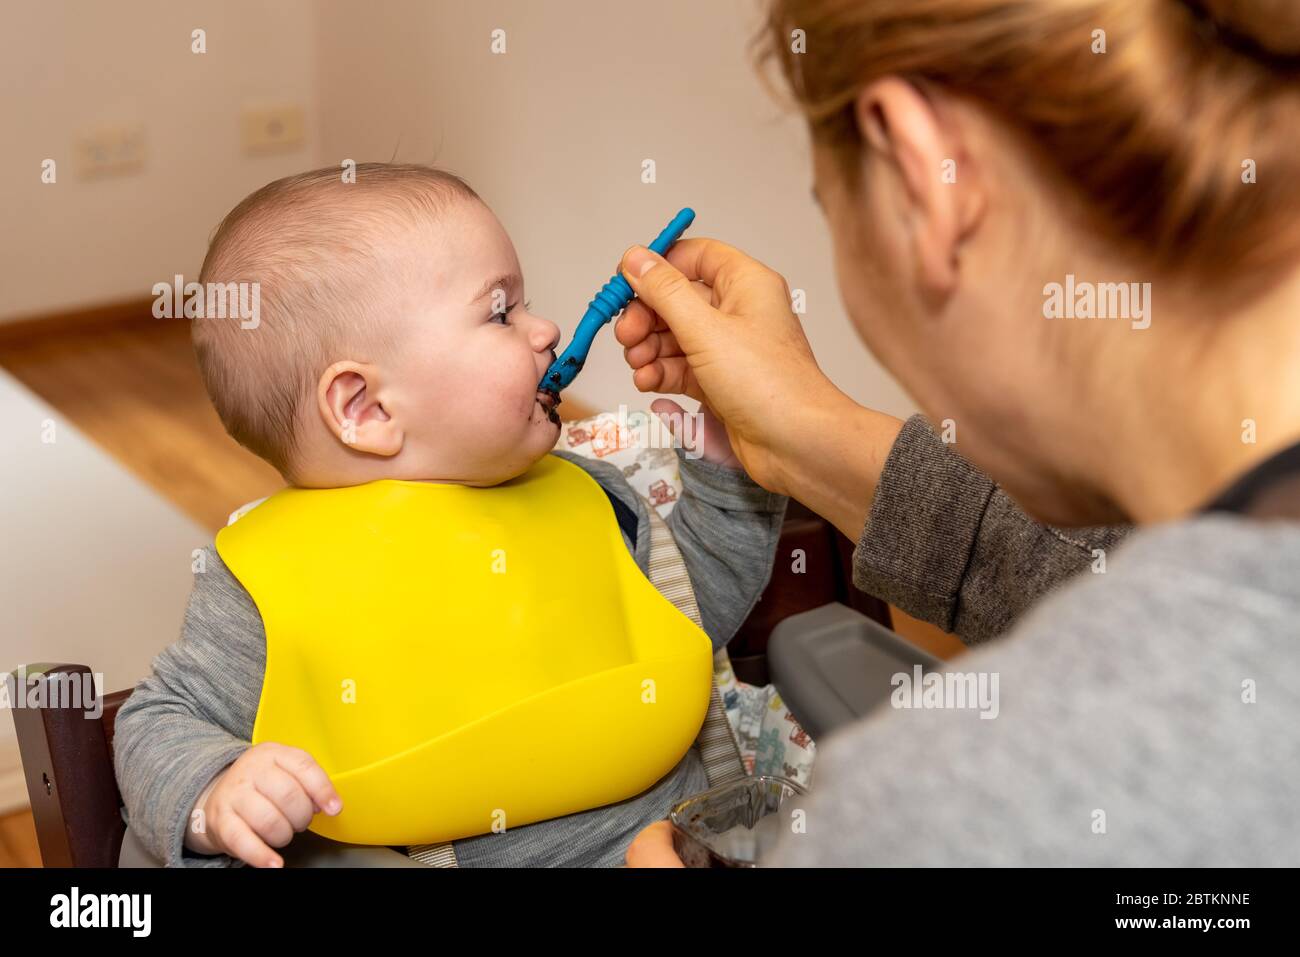 Adorable little baby boy in feeding chair being spoon fed by his mother Stock Photo